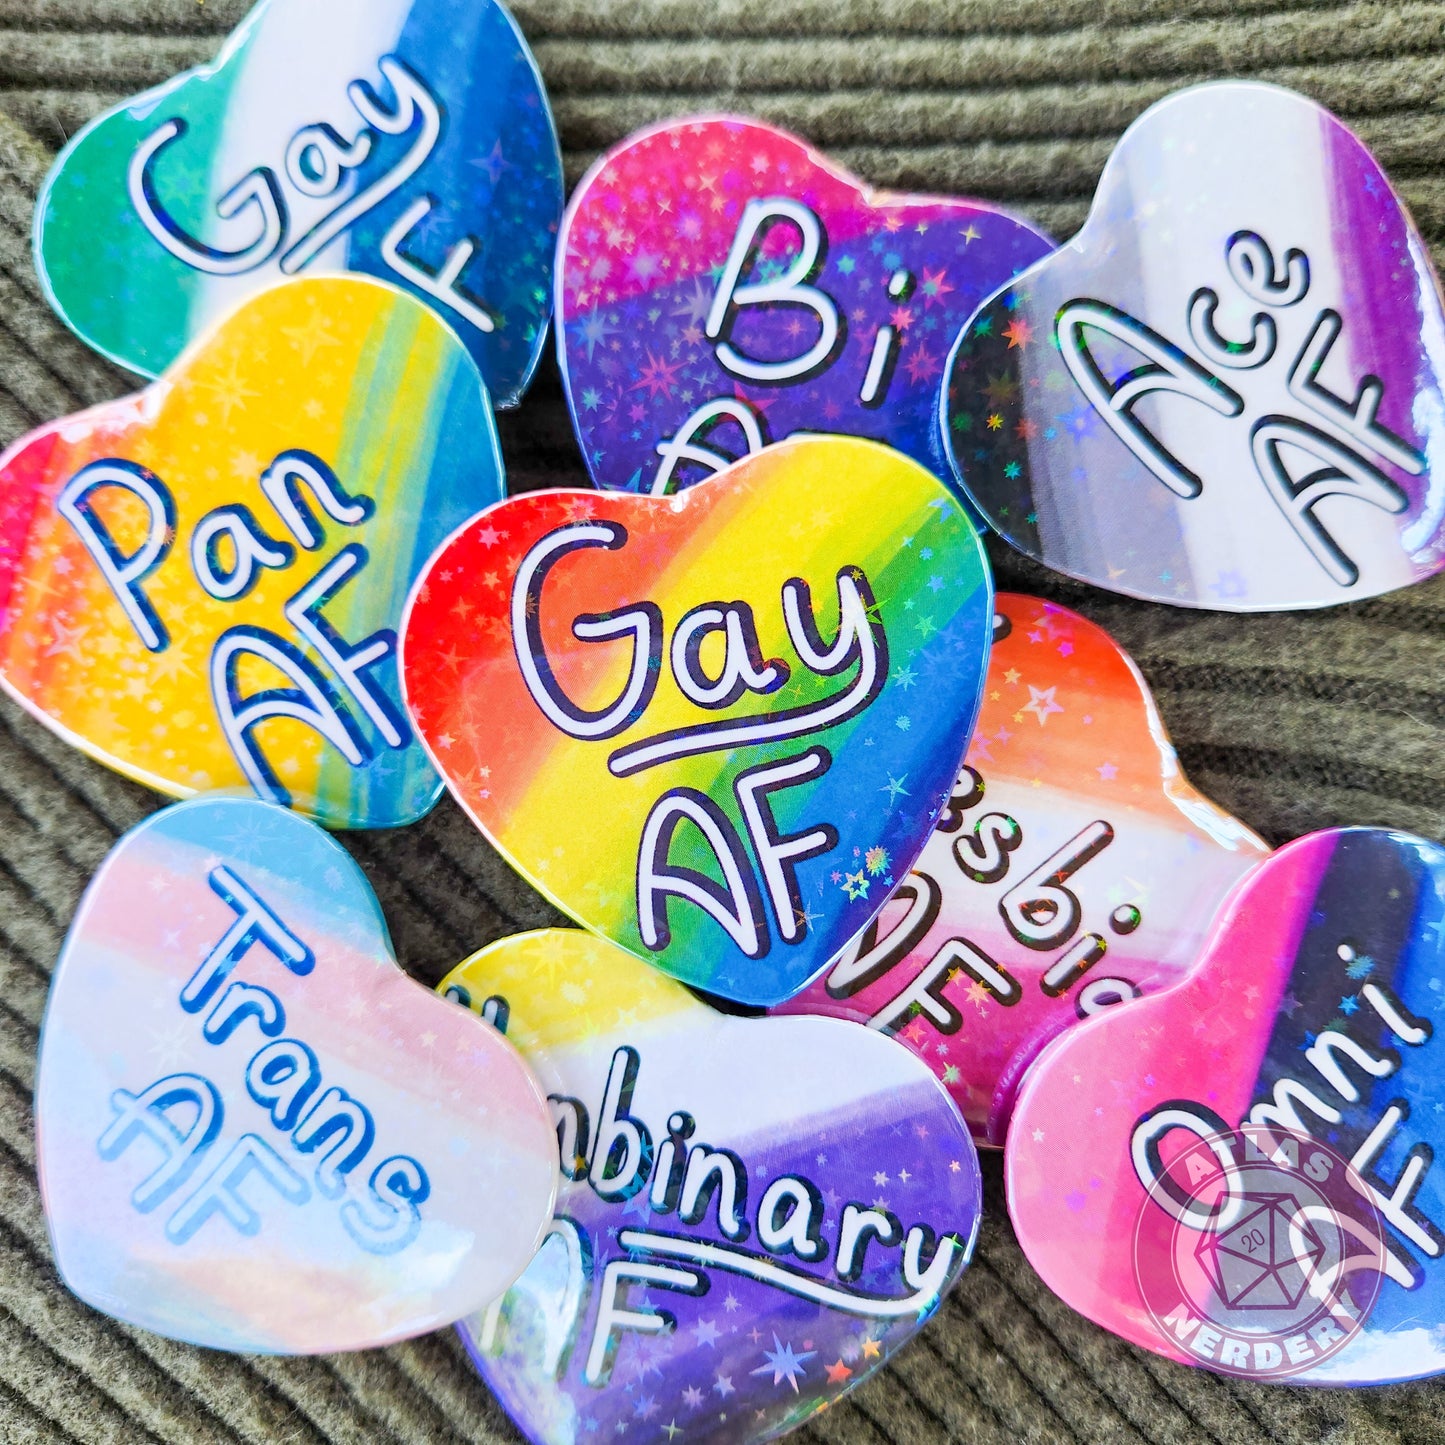 Queer AF - Queer Pride Flag 2.25” x 2” Holographic Heart Shaped Pinback Button